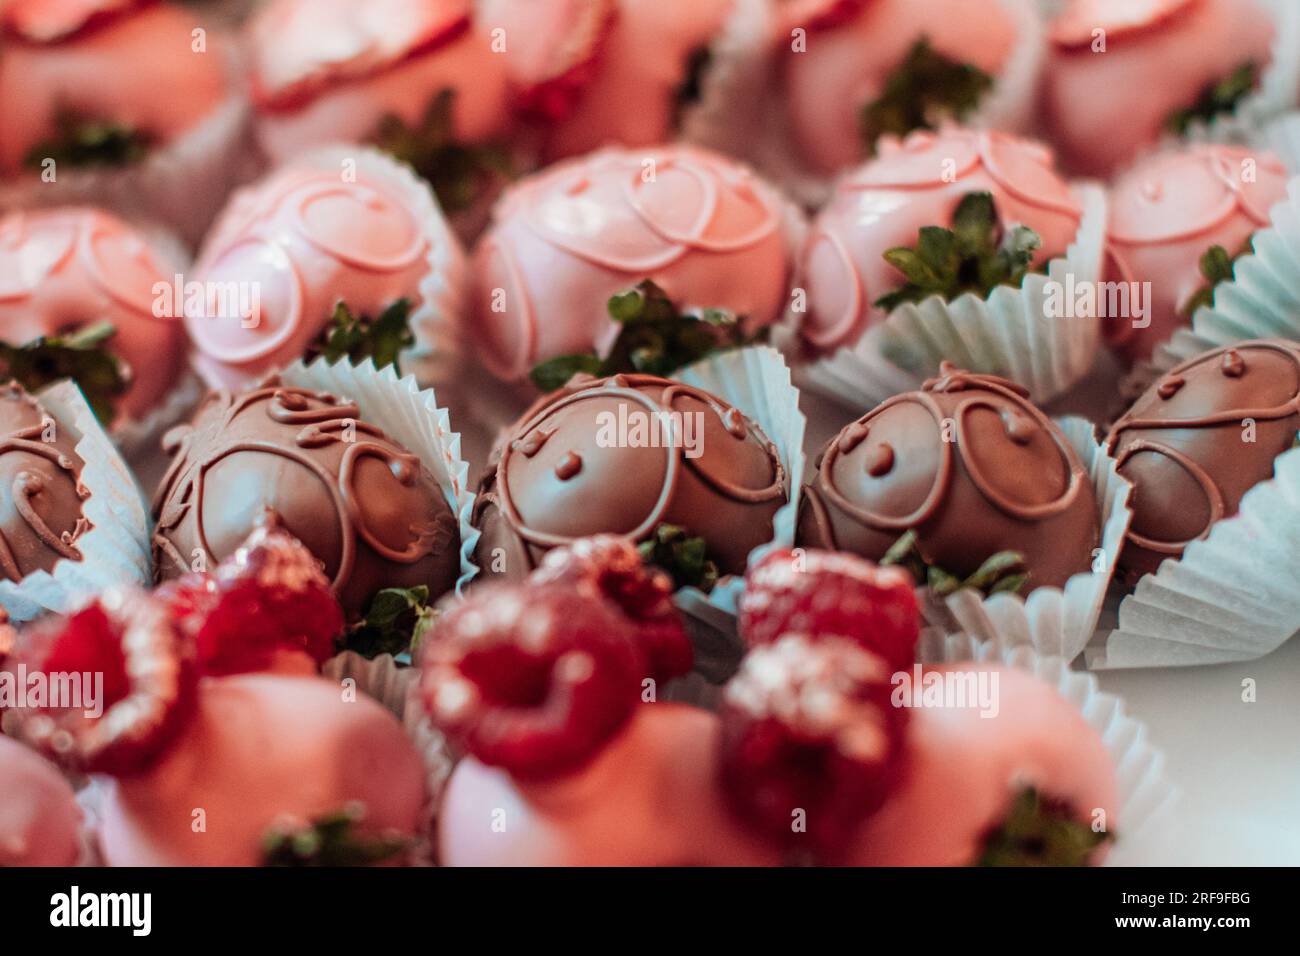 Pink chocolate covered strawberries with fresh raspberries on top. Candies and sweets collection. Tasty set for holidays Stock Photo